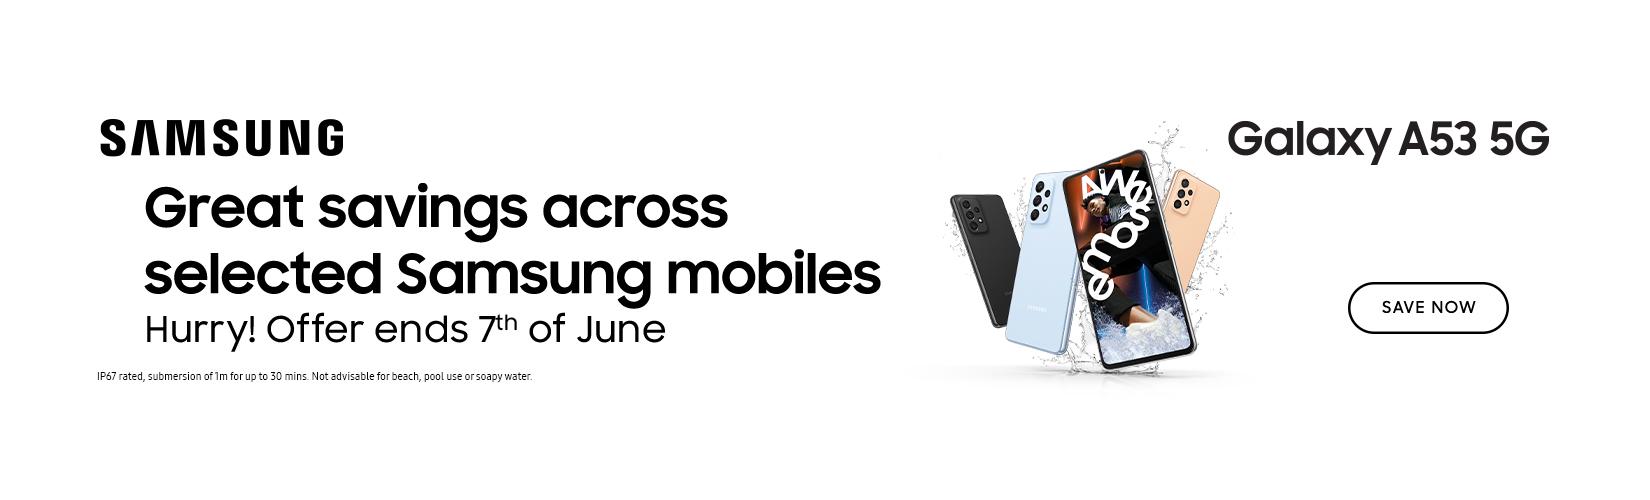 Samsung. Great savings across selected Samsung mobiles. Hurry! Offer ends 7th of June.